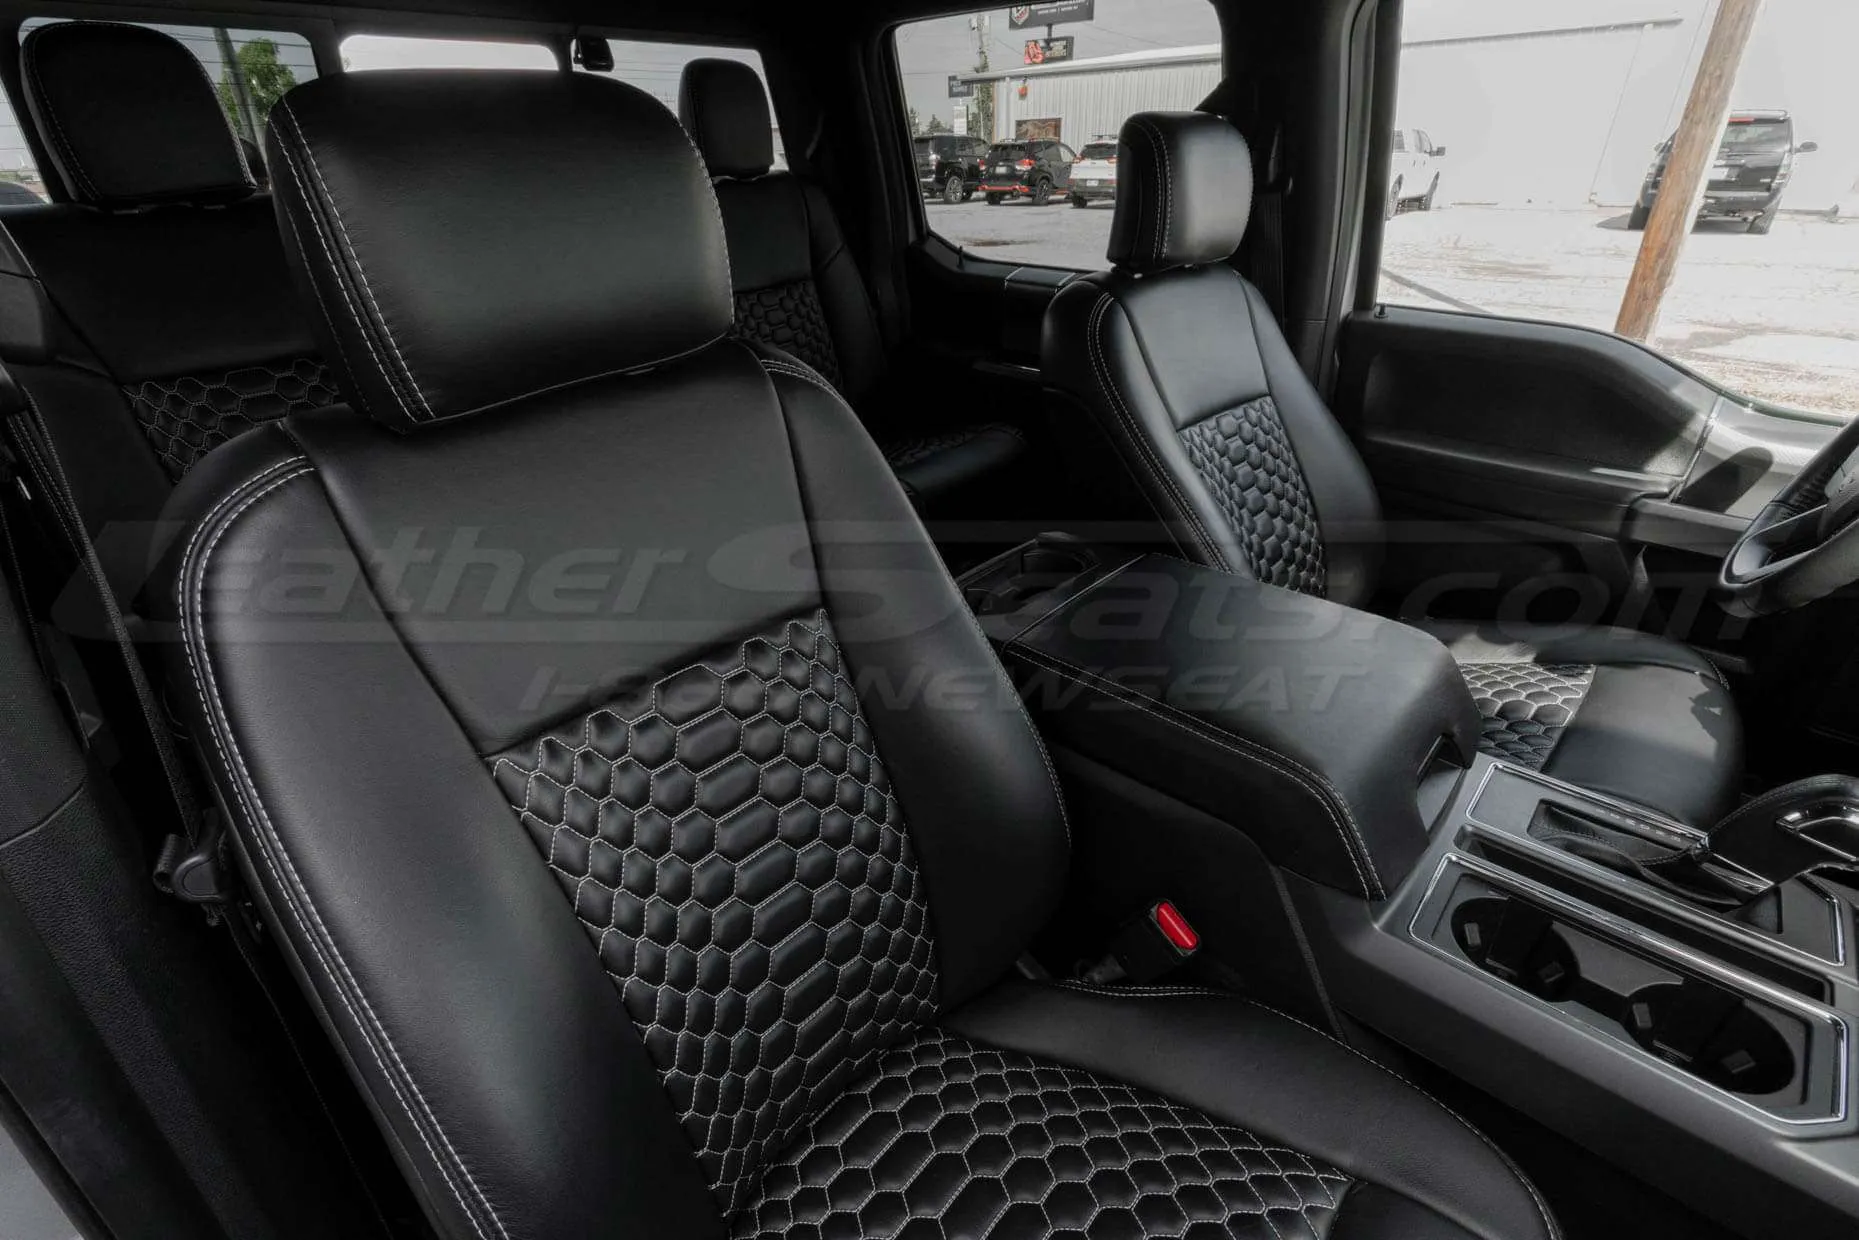 Ford F150 Supercab Installed Quilted Lather Seats - Black - Front passenger backrest